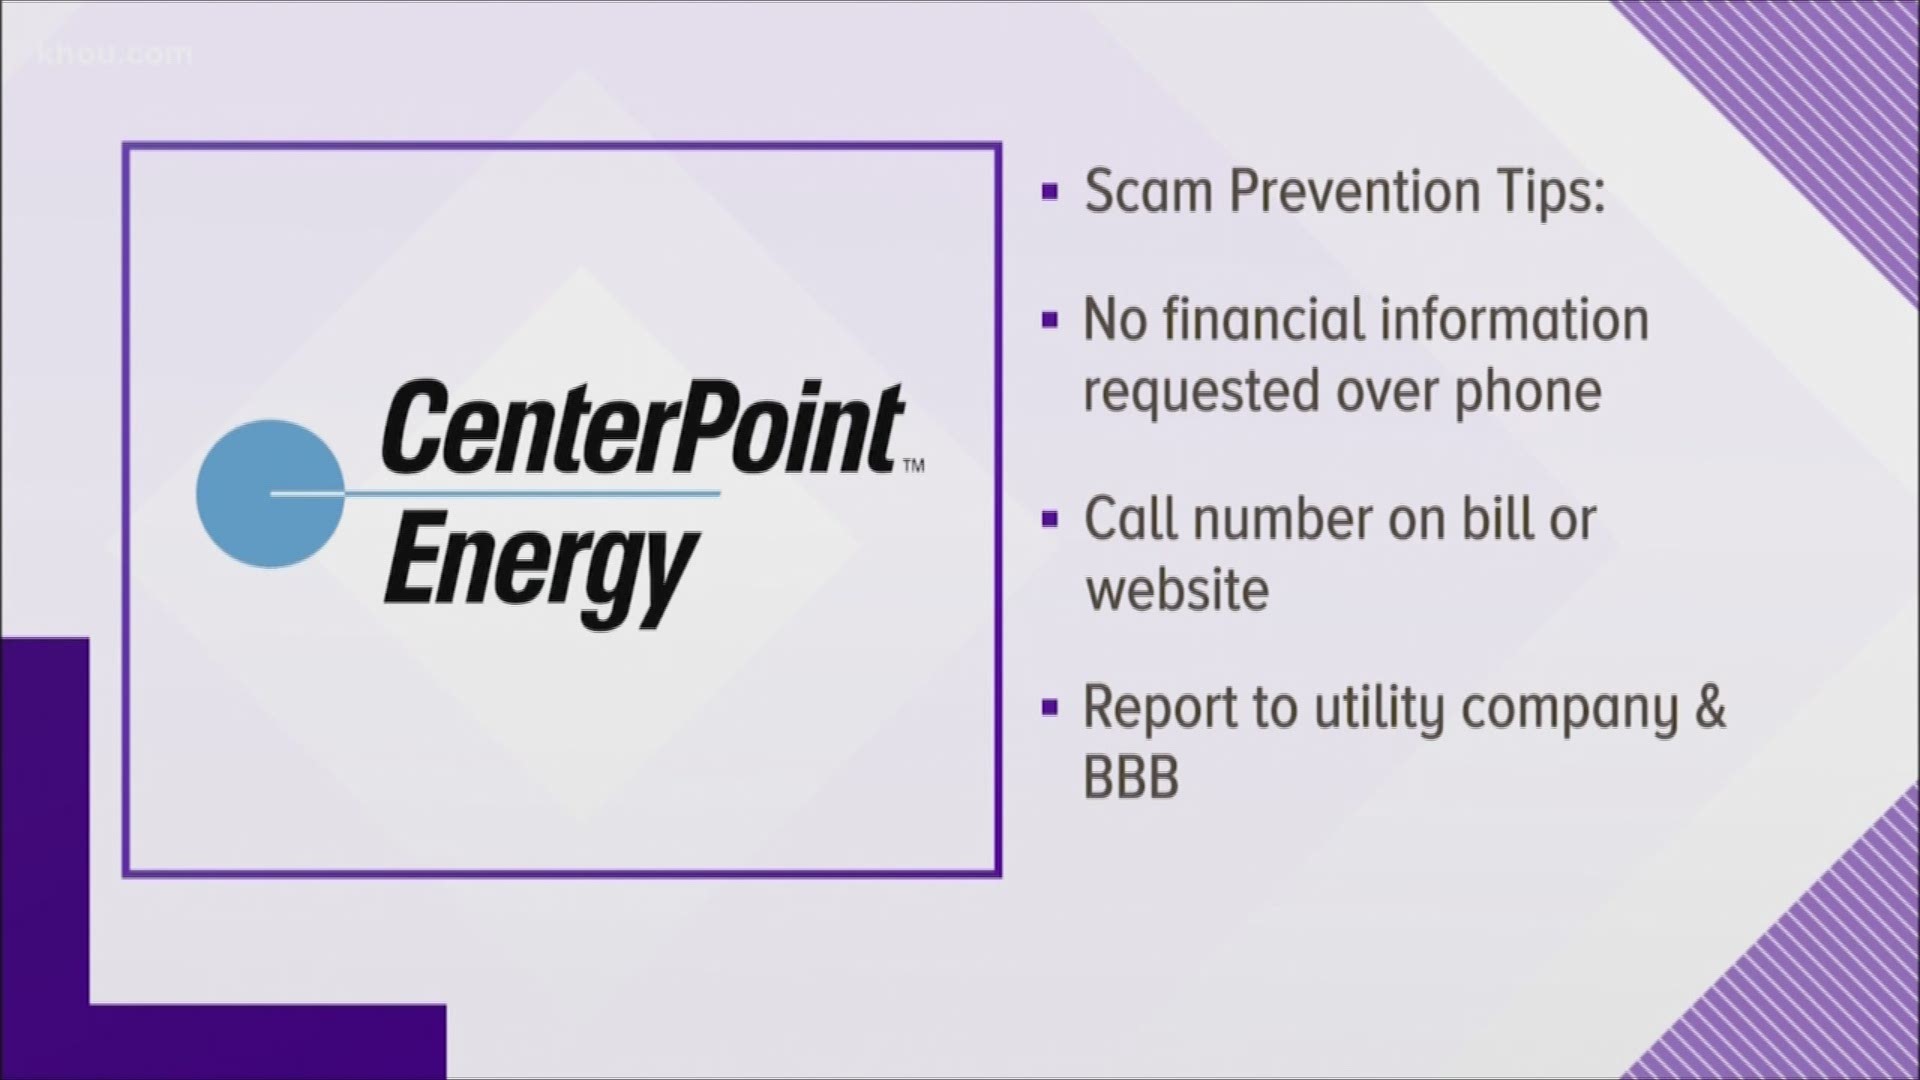 CenterPoint Energy is warning its customers of a scam where the scammer tries to convince customers they need to pay their bills by giving out their credit card information.